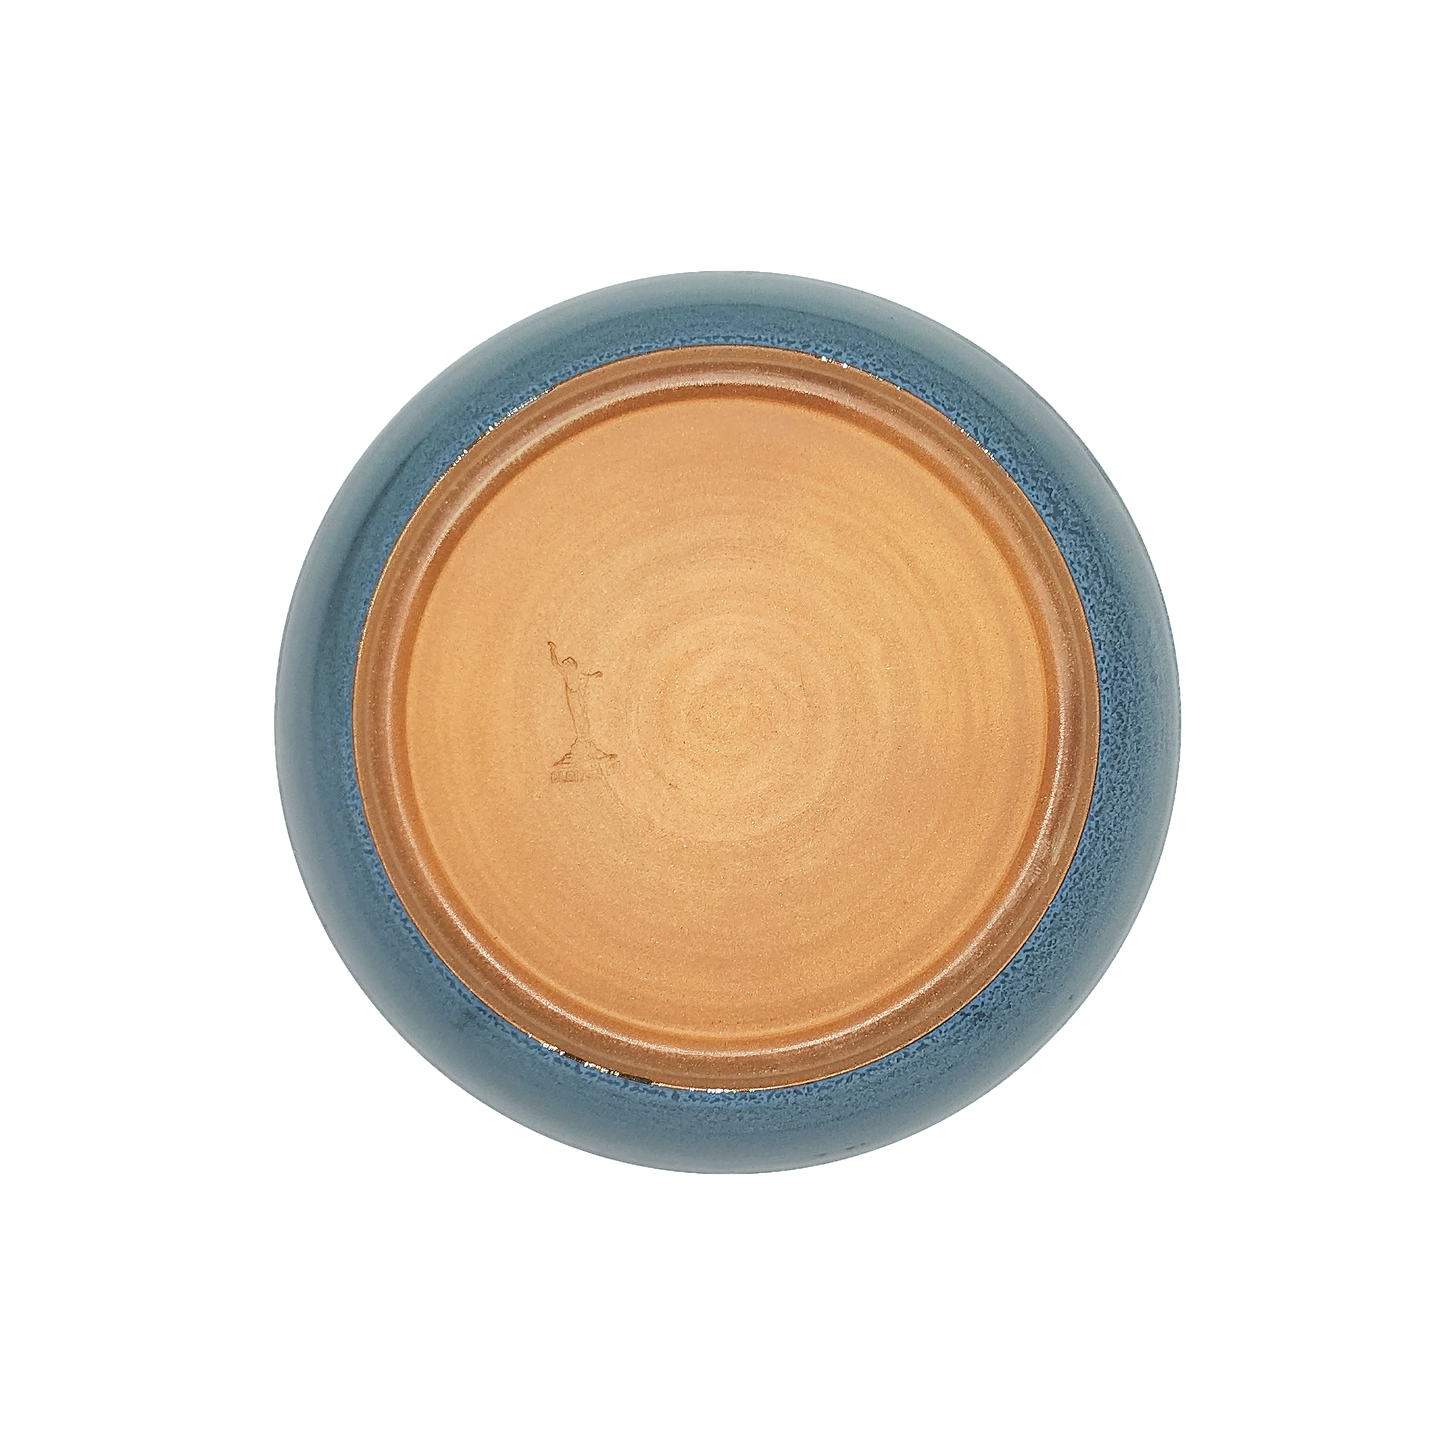 Image: A large pasta dish with a diameter of 10 inches, handcrafted by Clinton Pottery, featuring a light blue glaze. The gentle blue color of the glaze adds a calming and soothing ambiance, making it an ideal choice for presenting generous servings of pasta dishes with a hint of tranquility.